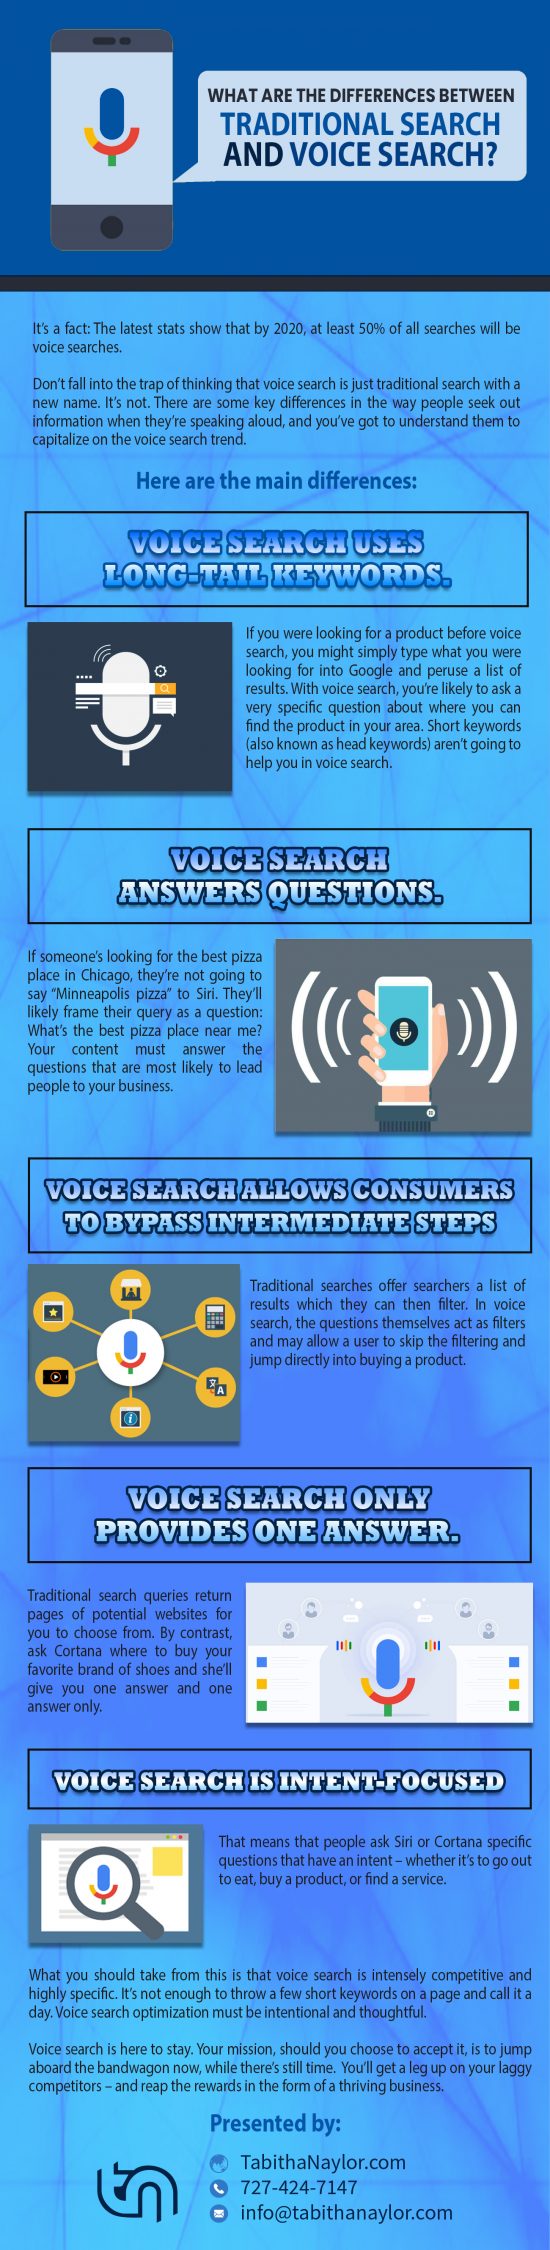 What-Are-the-Differences-Between-Traditional-Search-and-Voice-Search-550x2250  